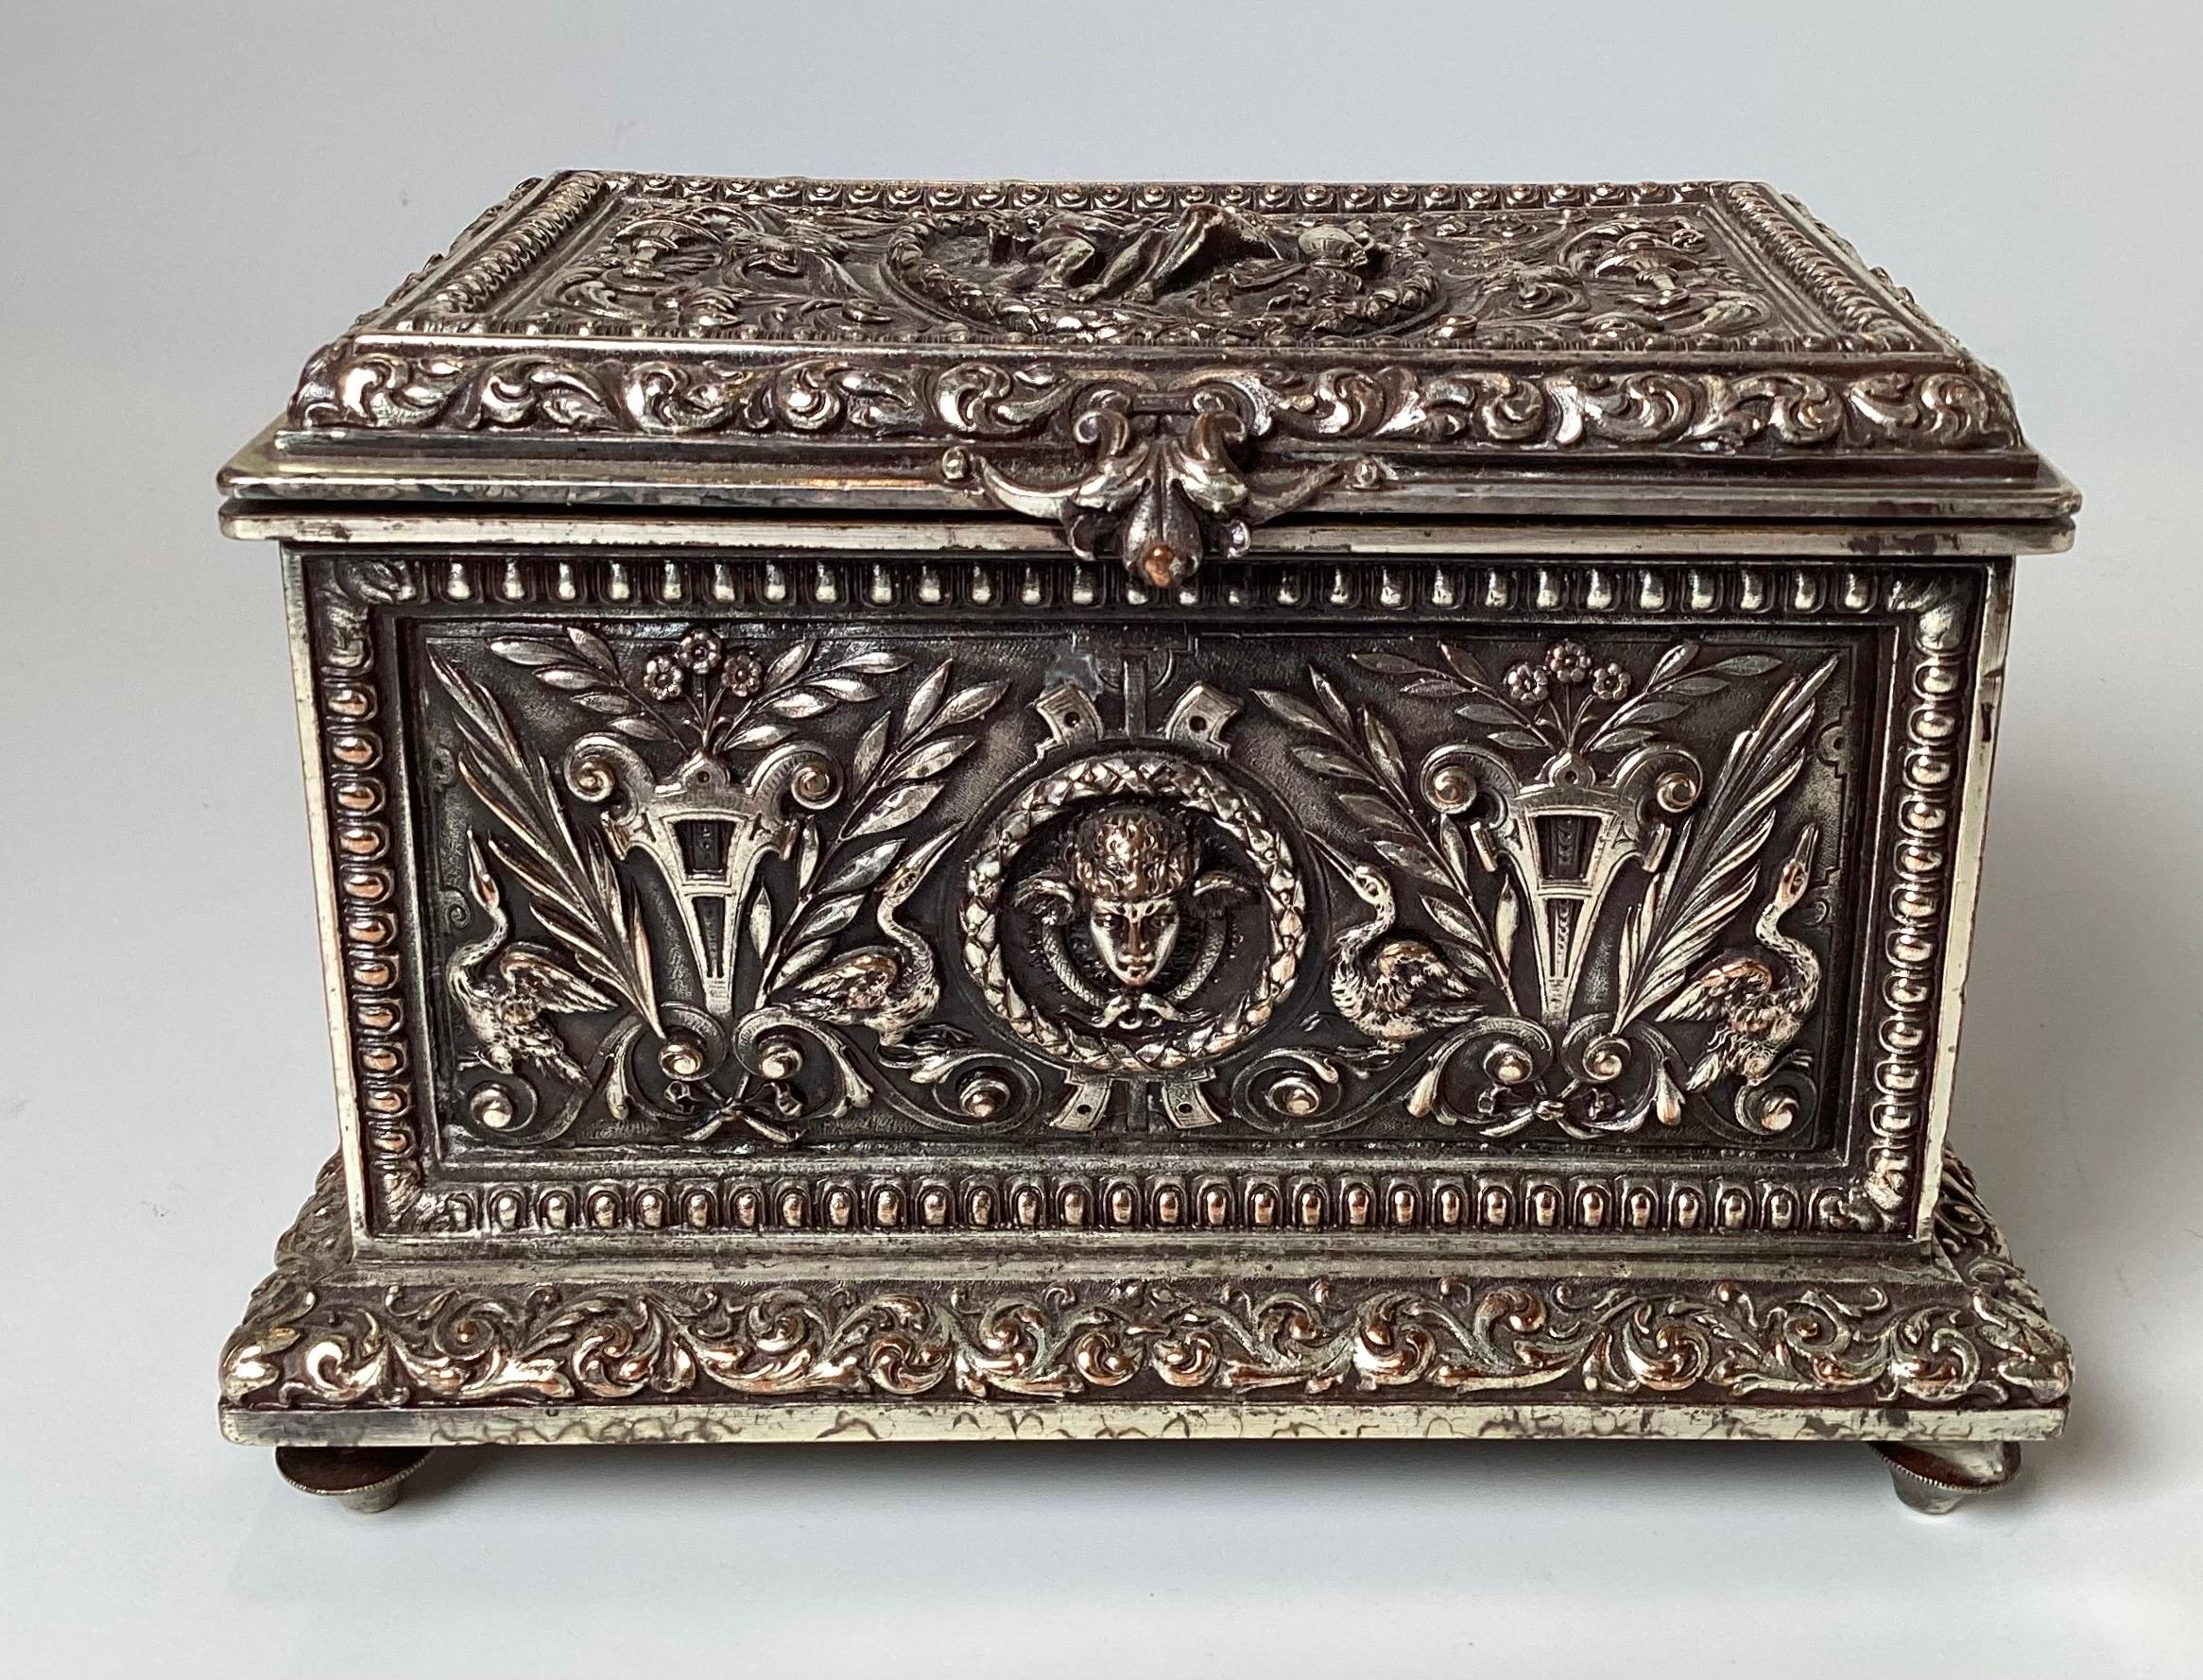 A silver plate high relived table box with hinged lid. The box is decorated with egrets, winged cherubs faces and classical scenes. almost 6 inches wide, 4 inches deep, 4.5 inches high.